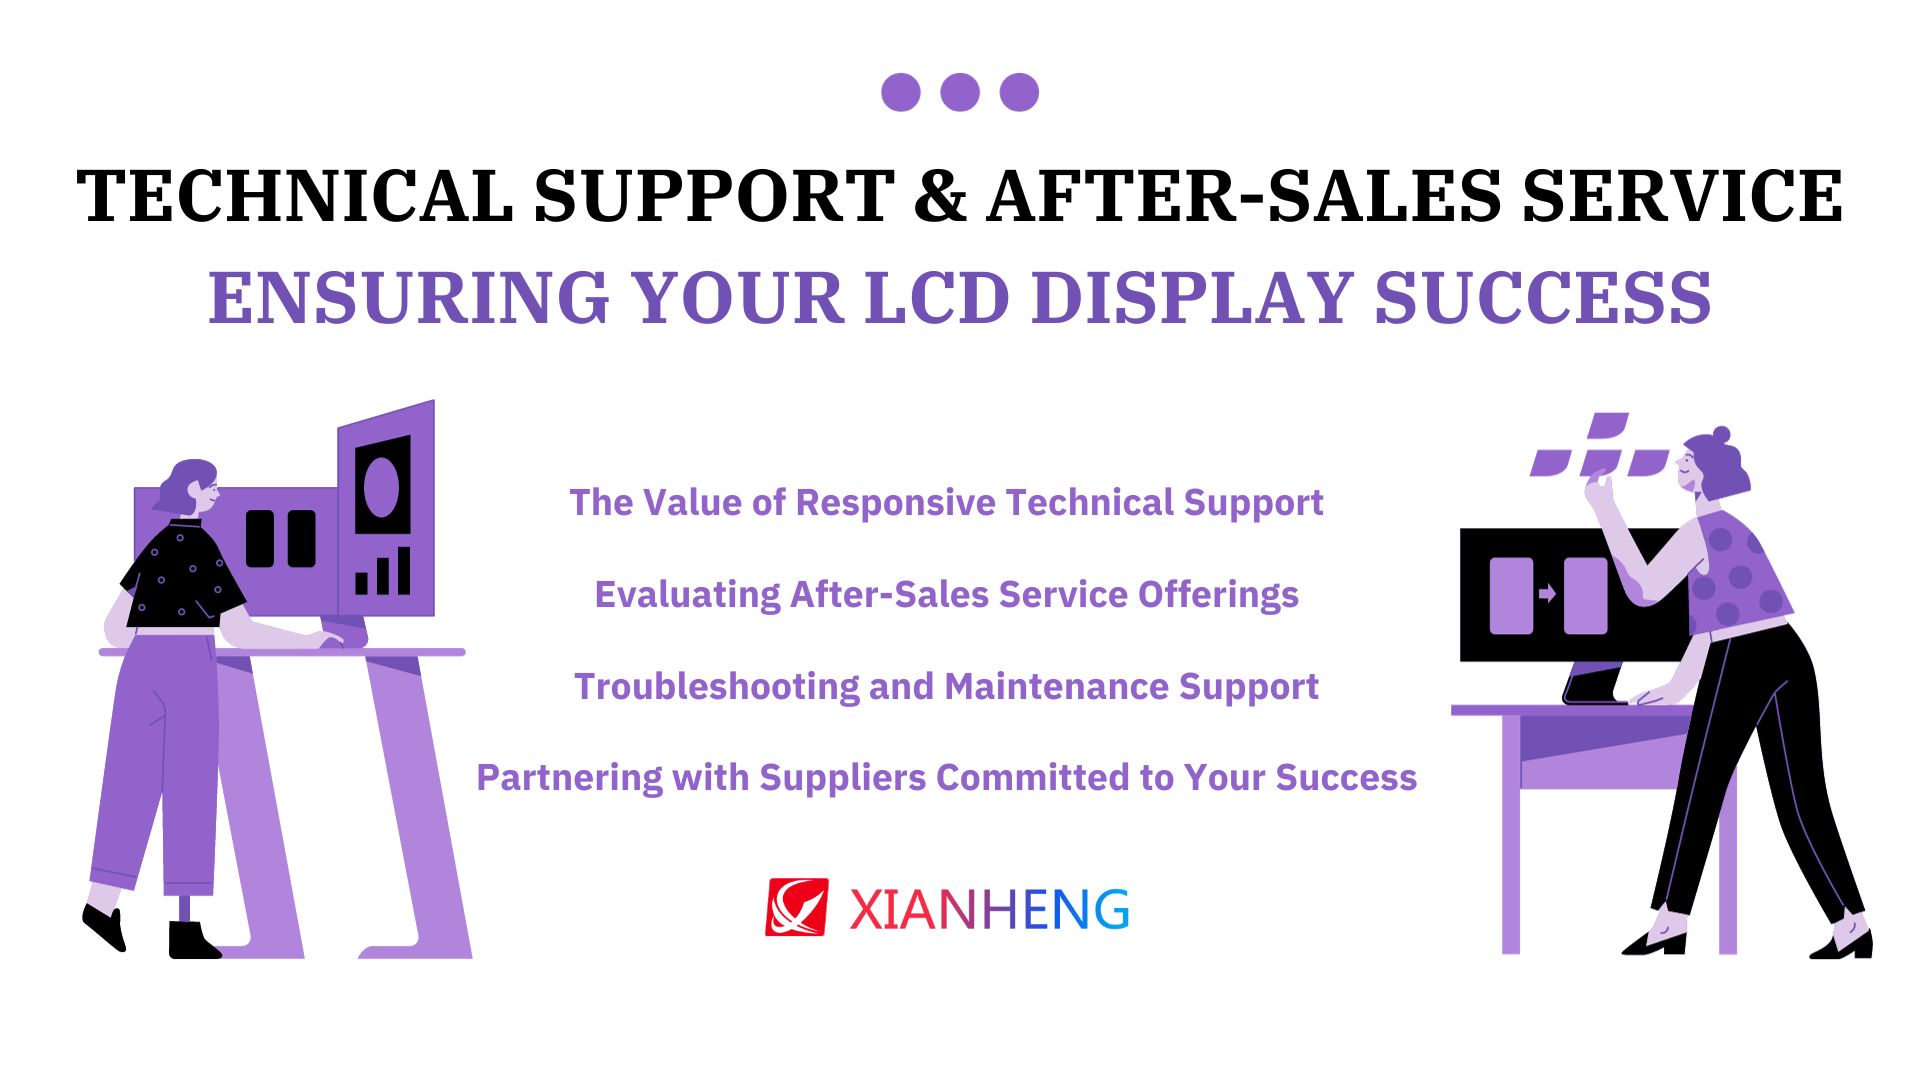 Technical Support and After-Sales Service: Ensuring Your LCD Display Success